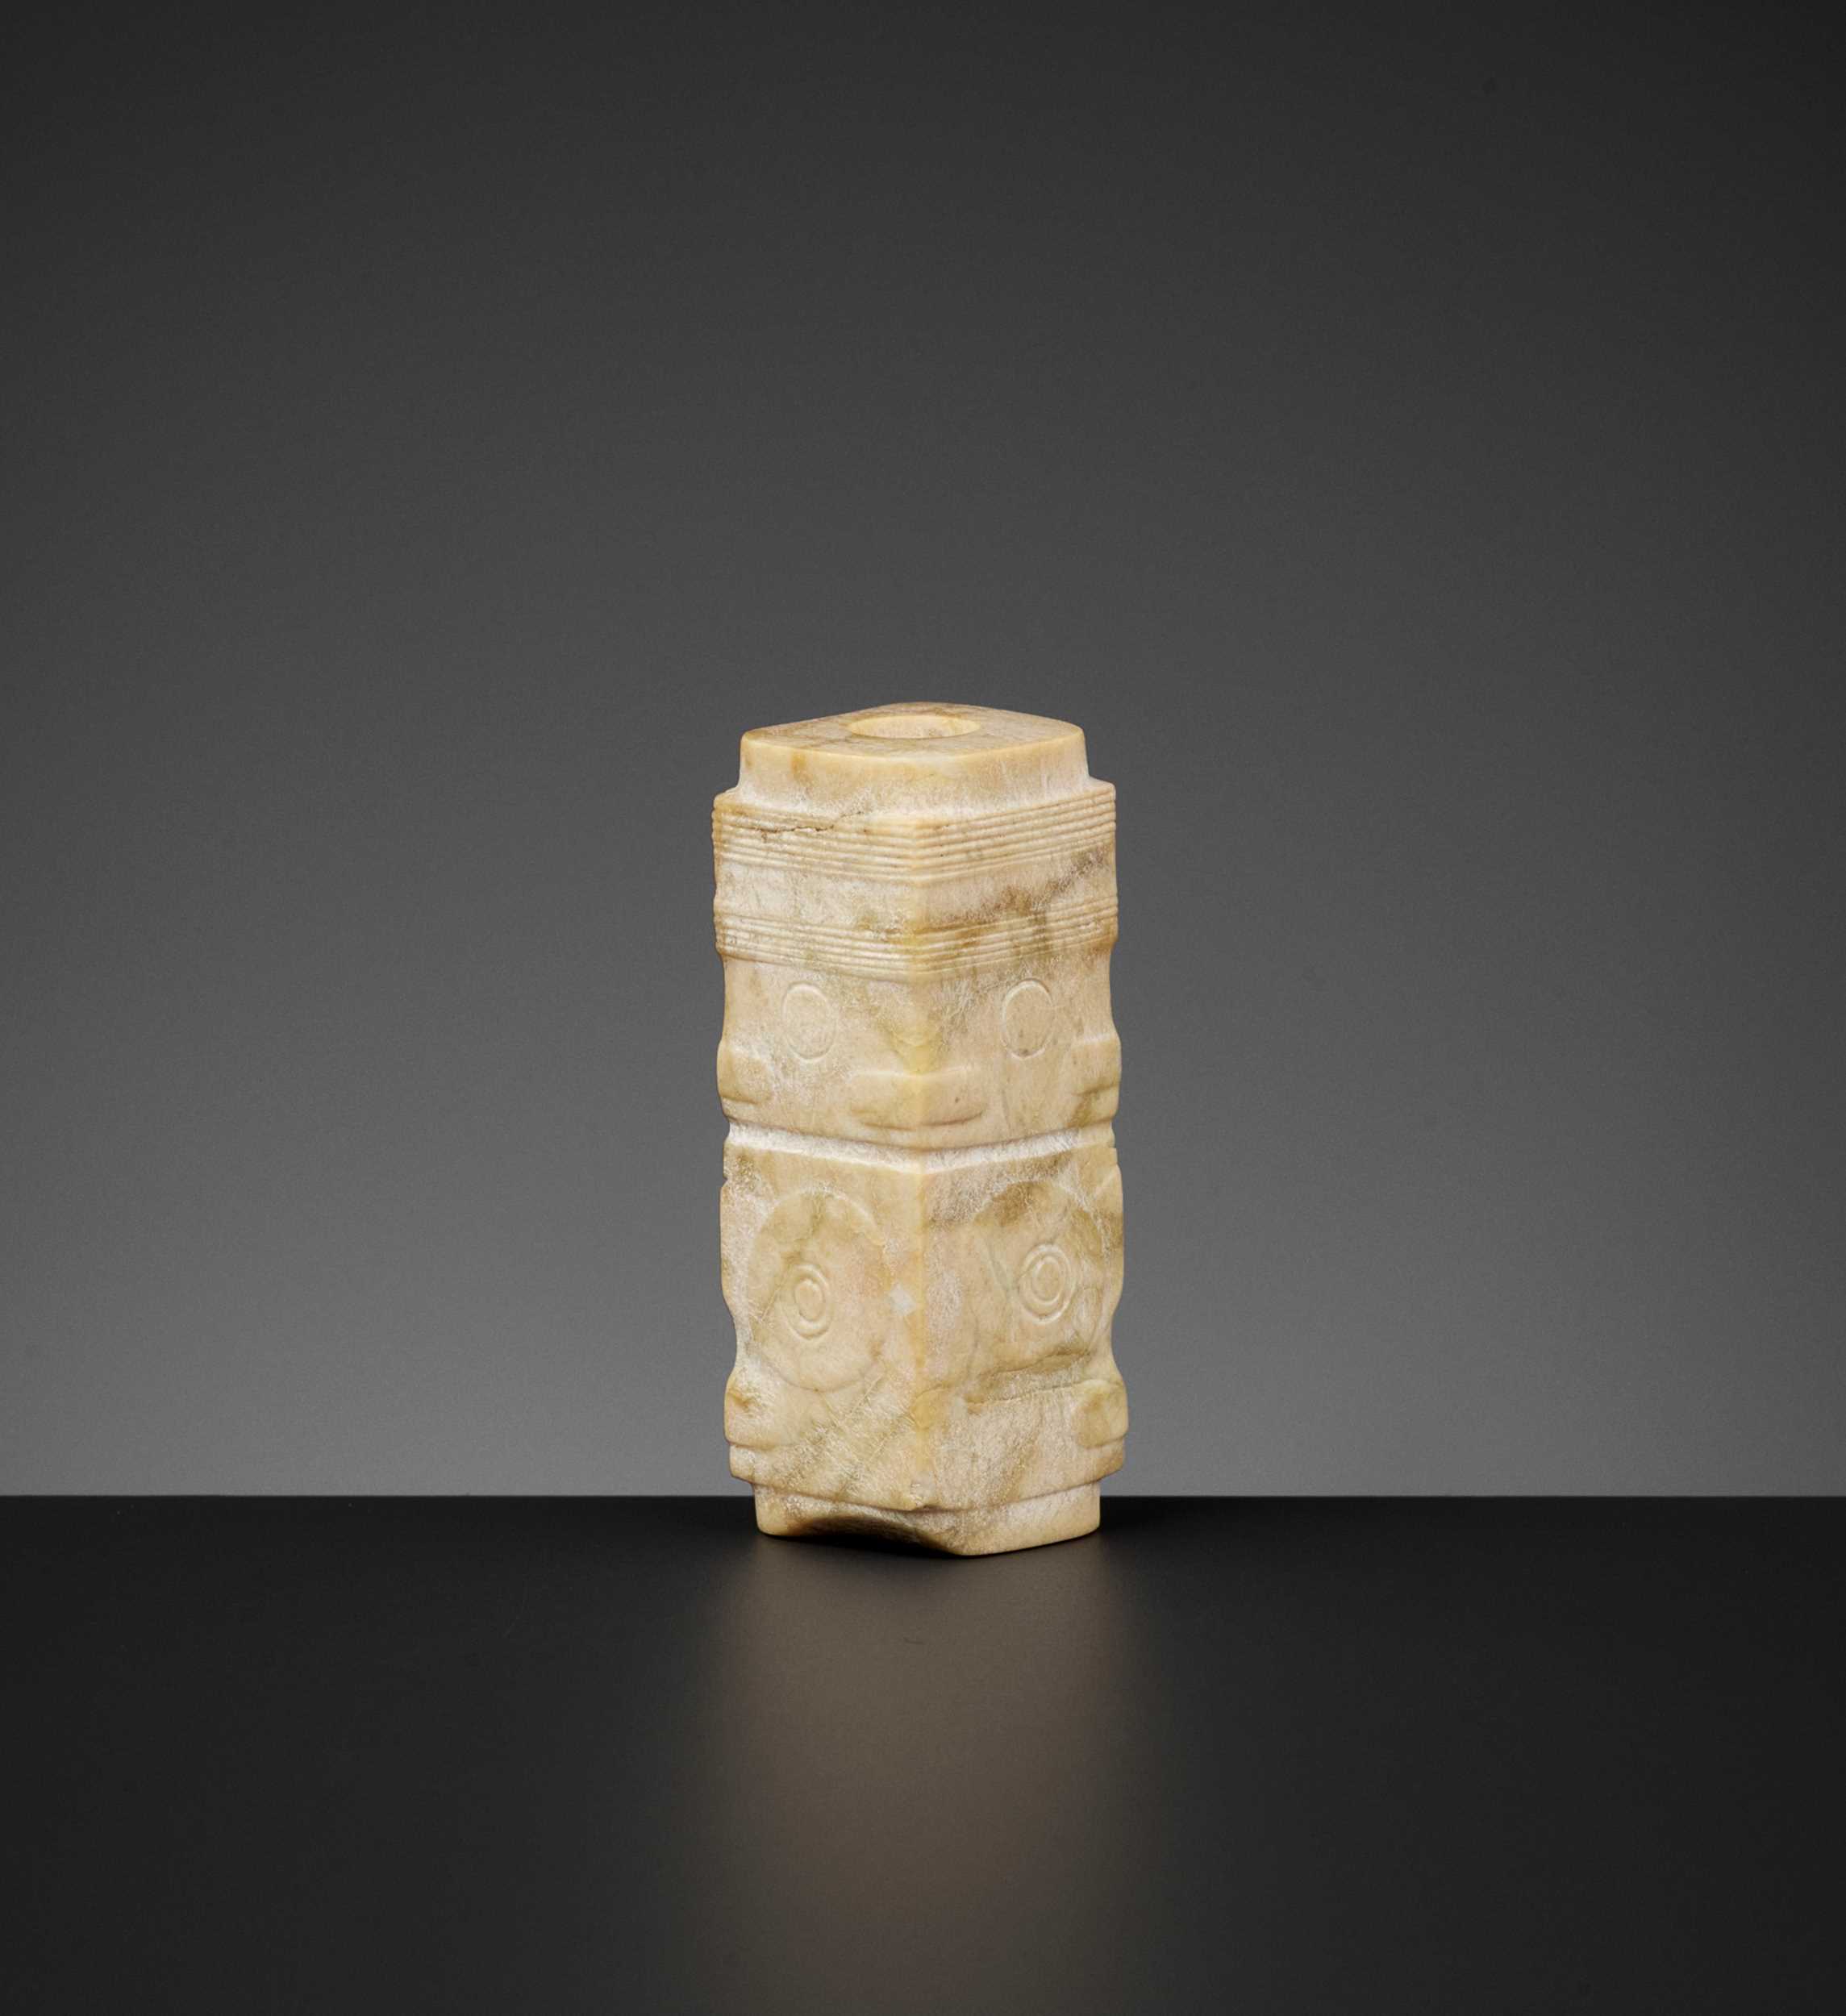 Lot 64 - A CONG-FORM ALTERED JADE BEAD, LIANGZHU CULTURE